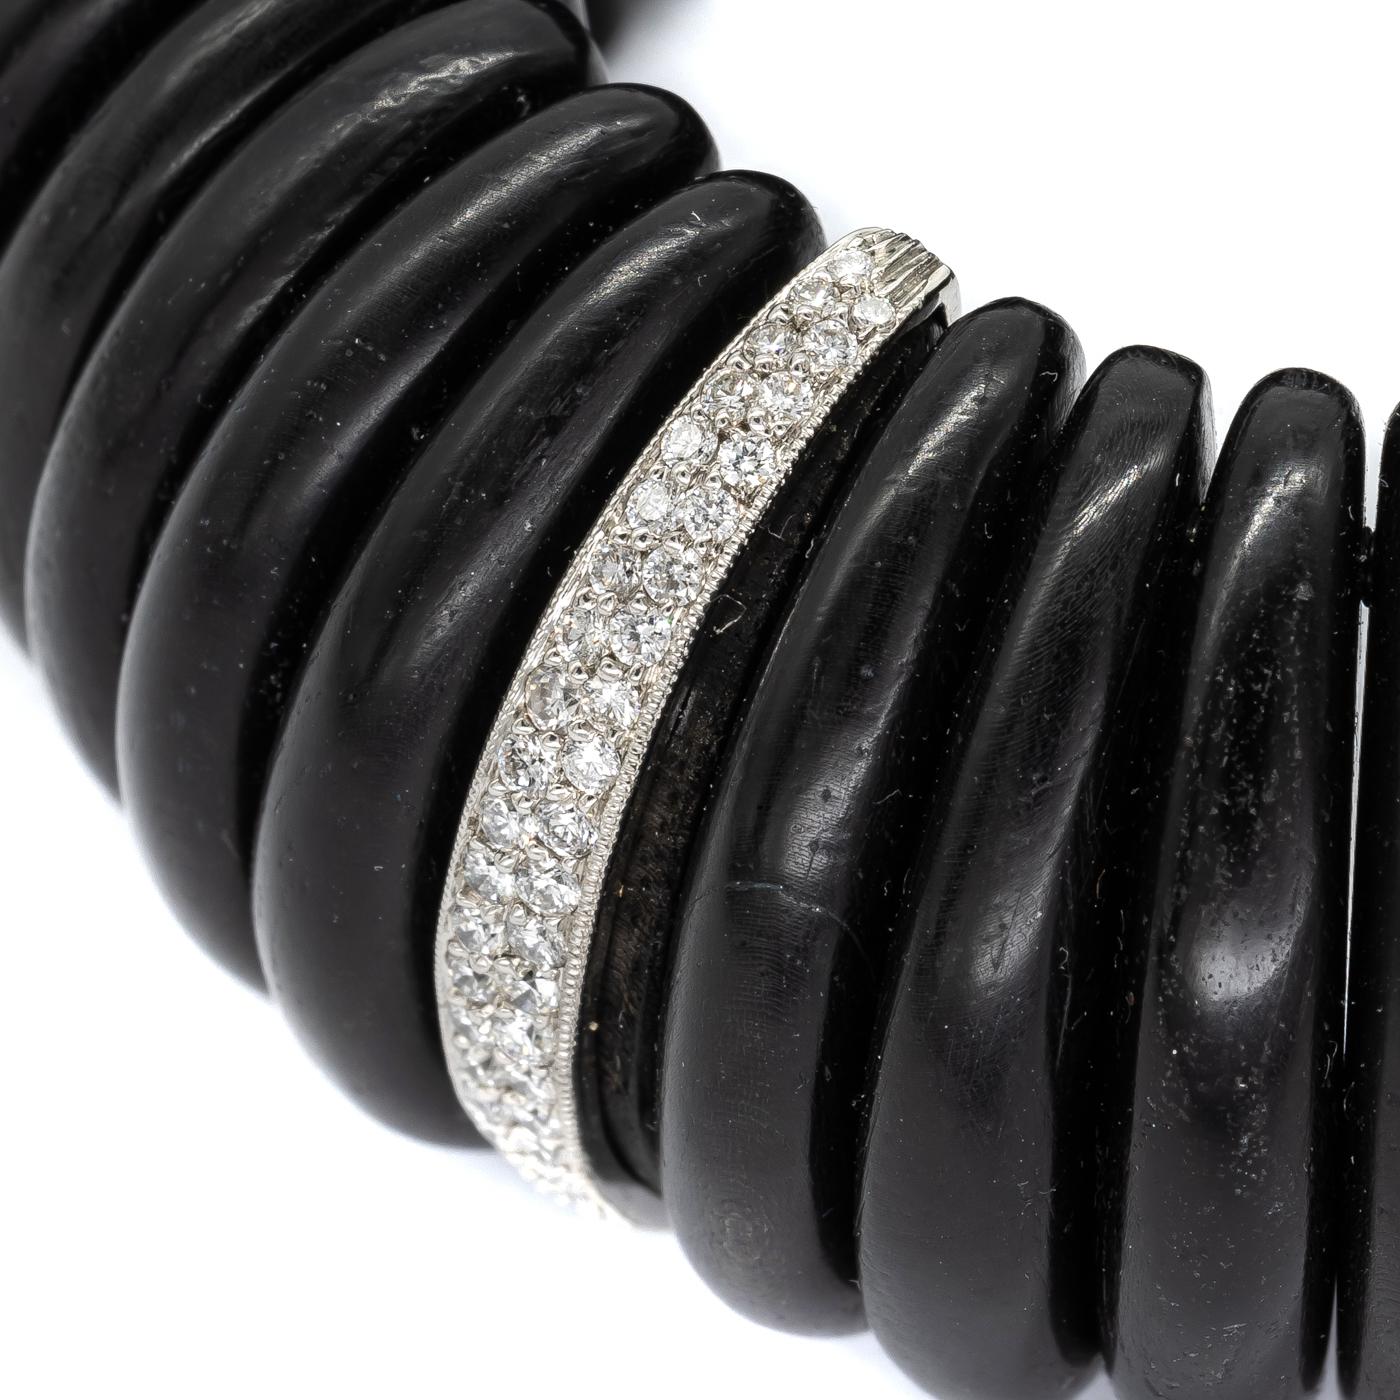 An ebony and diamond cuff bracelet, designed as a repeating pattern of eight, ebony segments, spaced by a diamond link, which is pavé set with two rows of graduated, round brilliant-cut diamonds, in platinum settings, weighing an estimated total of